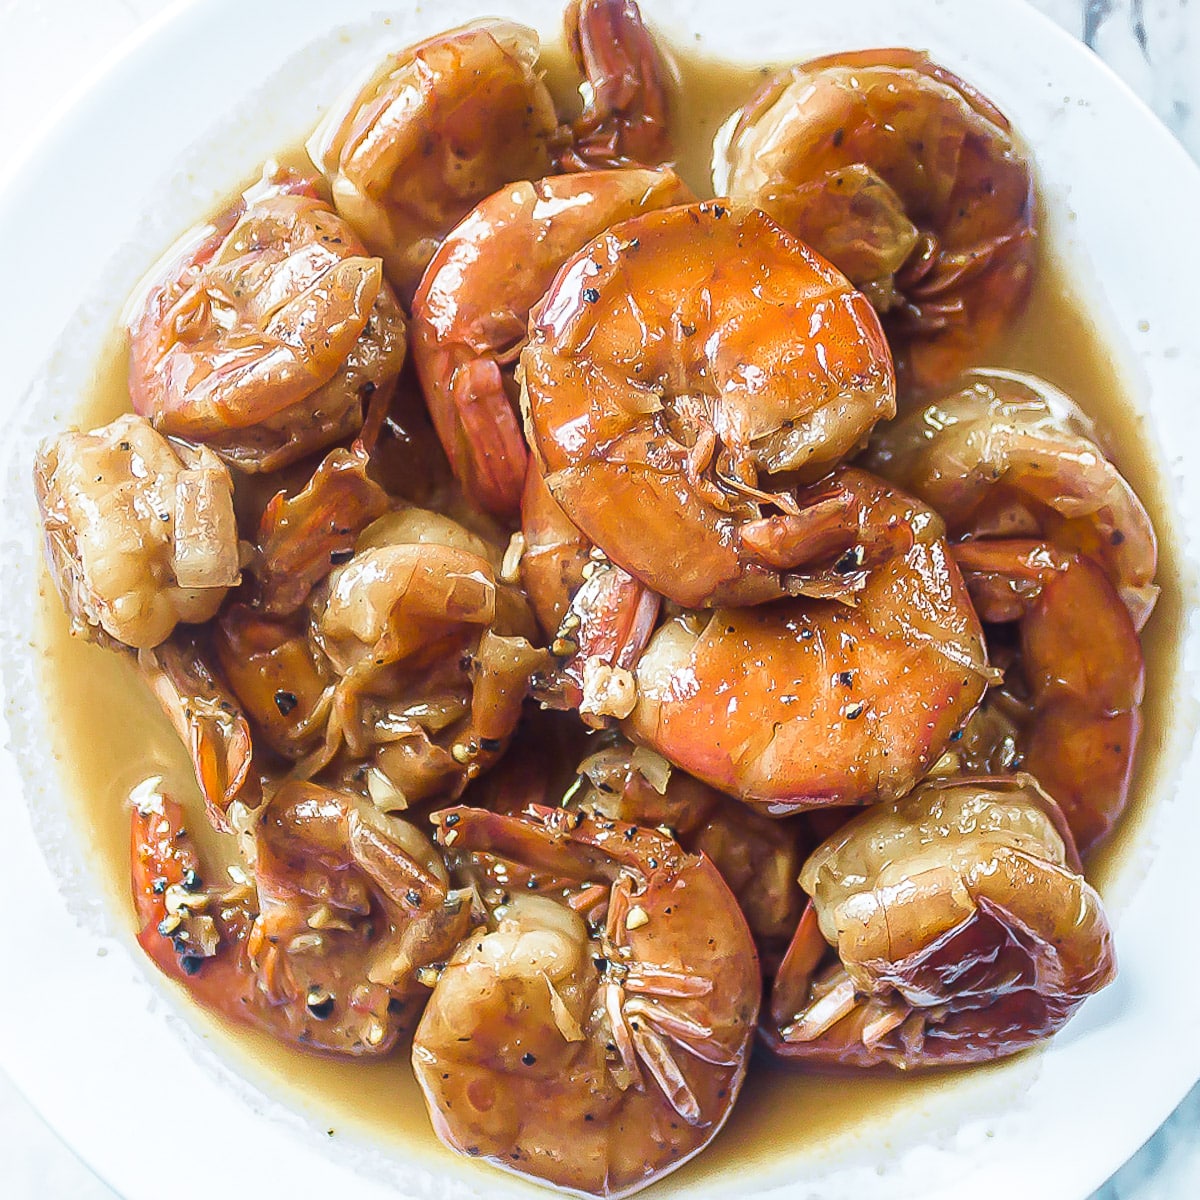 New Orleans style bbq shrimp in a white bowl.